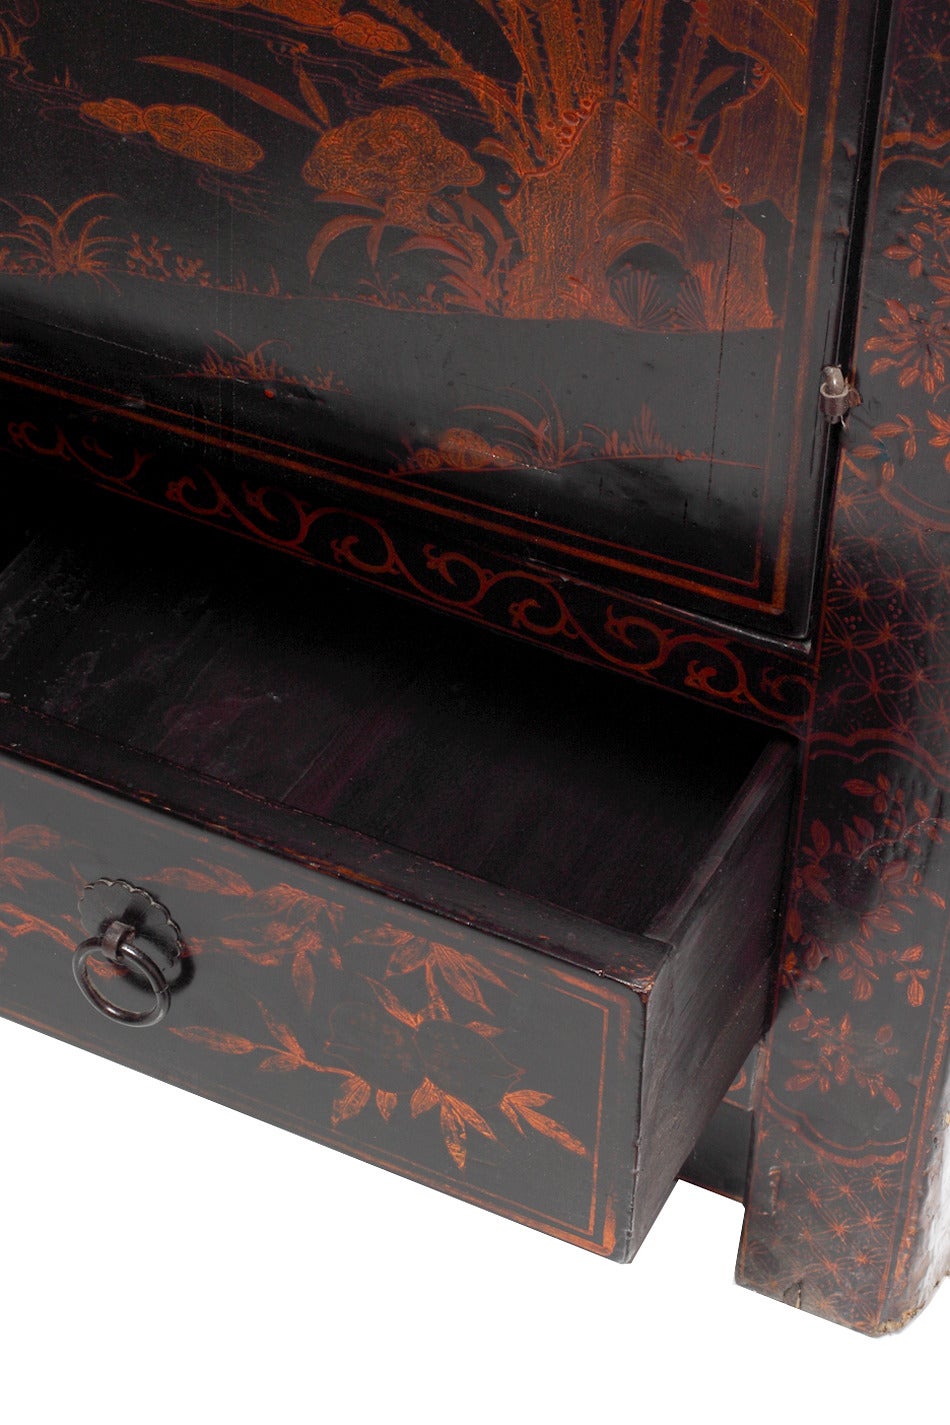 Wood Black Lacquered Cabinet with Hand-Painted Landscape from China, 19th Century